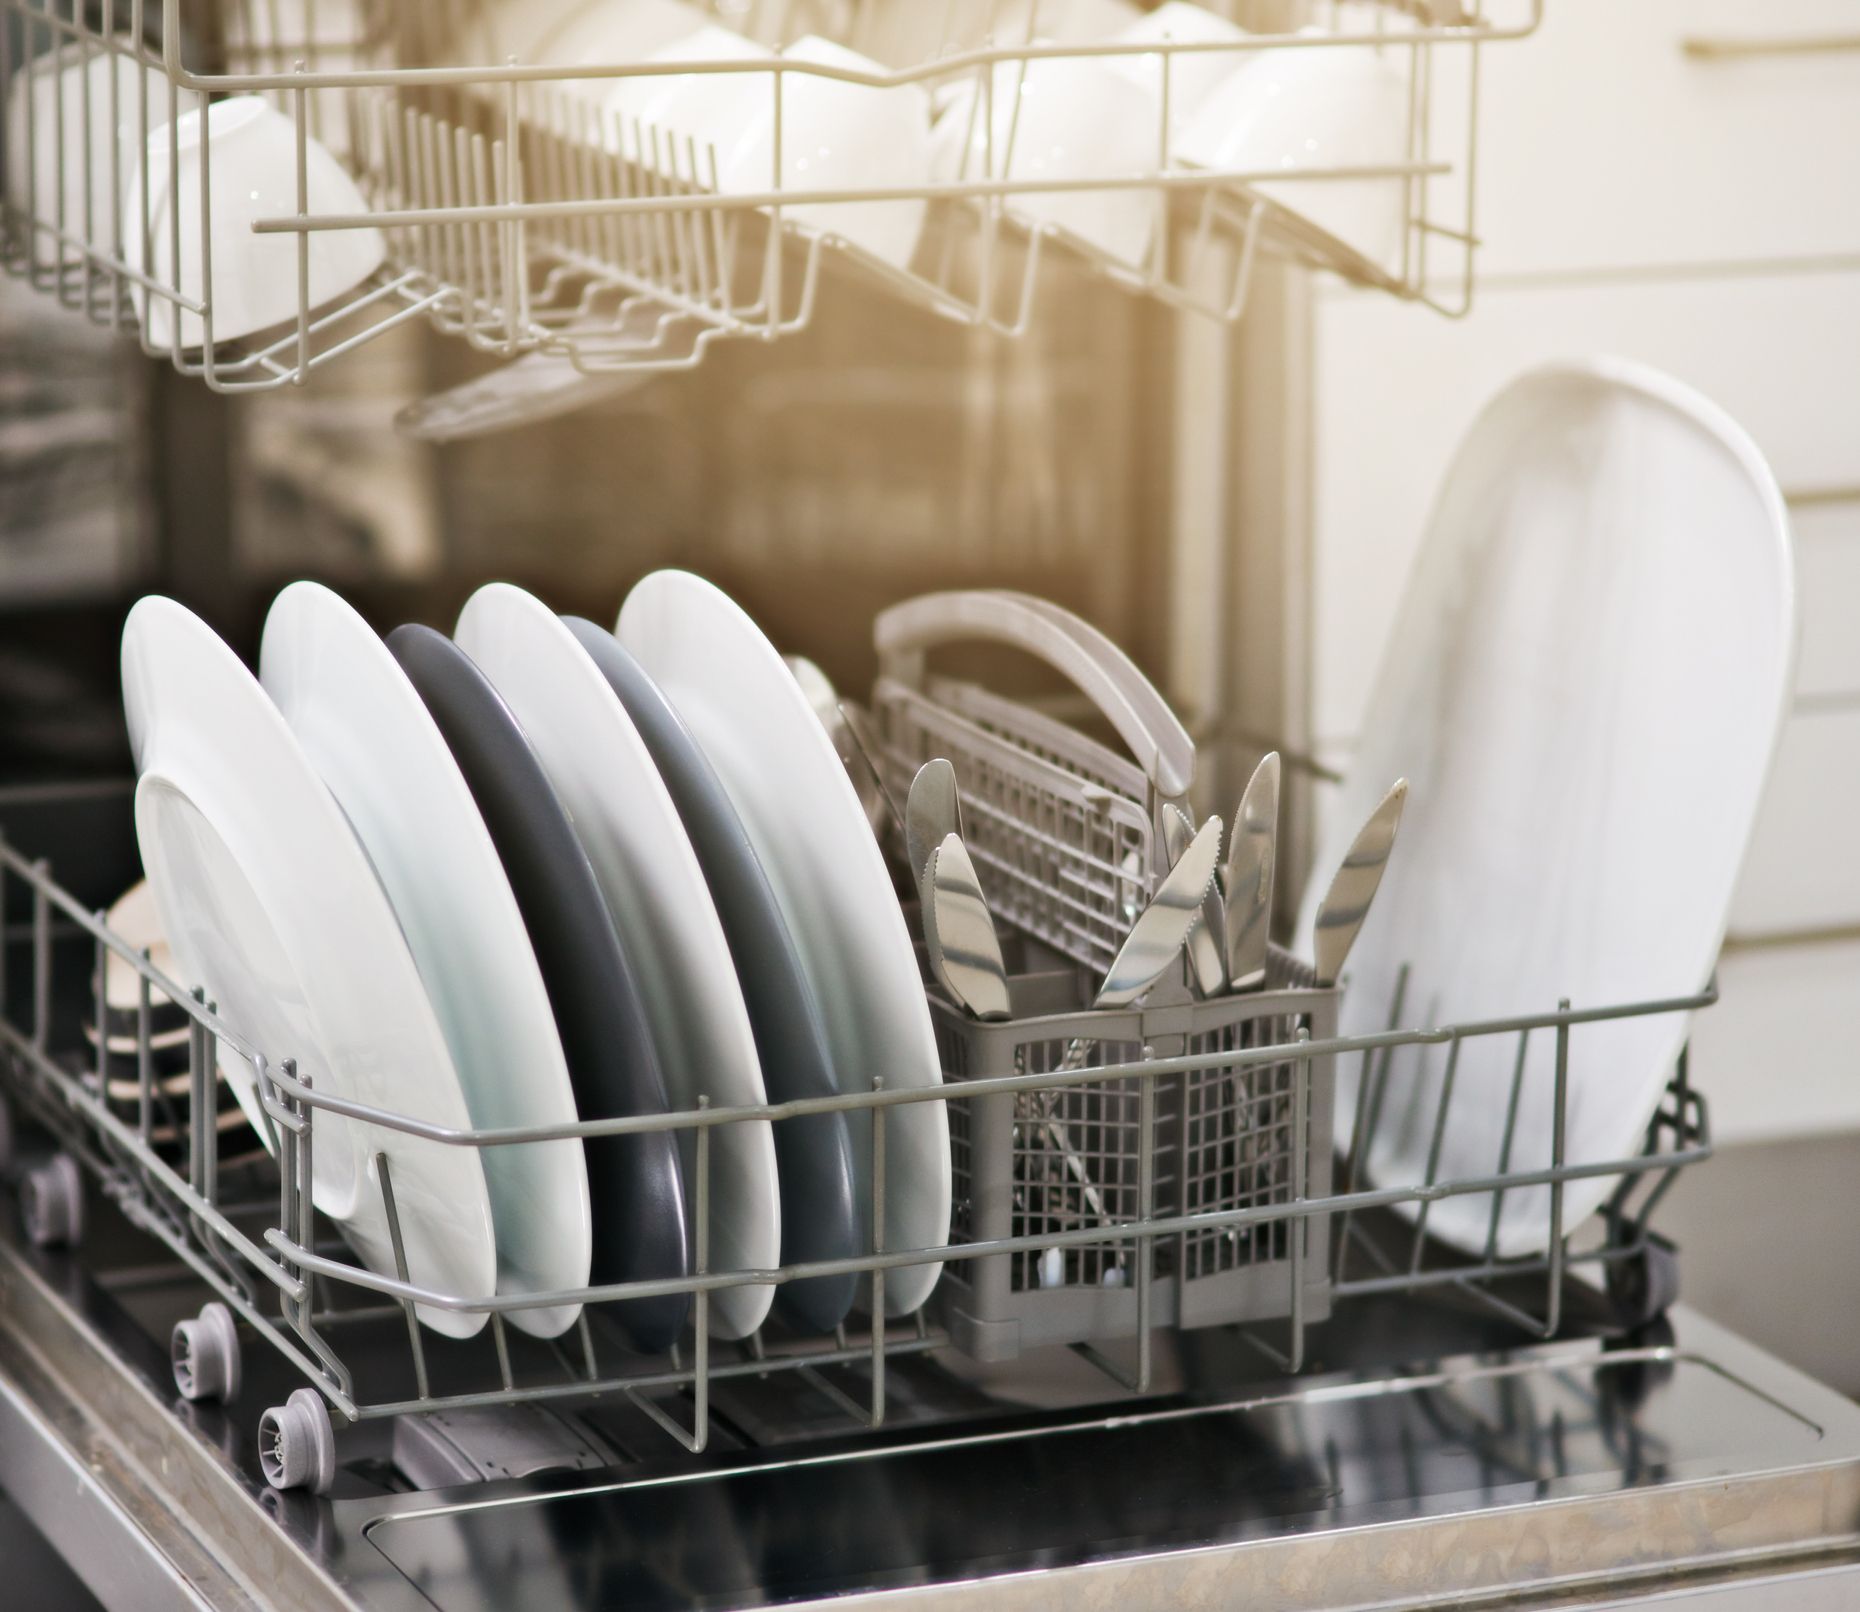 How to Clean a Dishwasher the Right Way